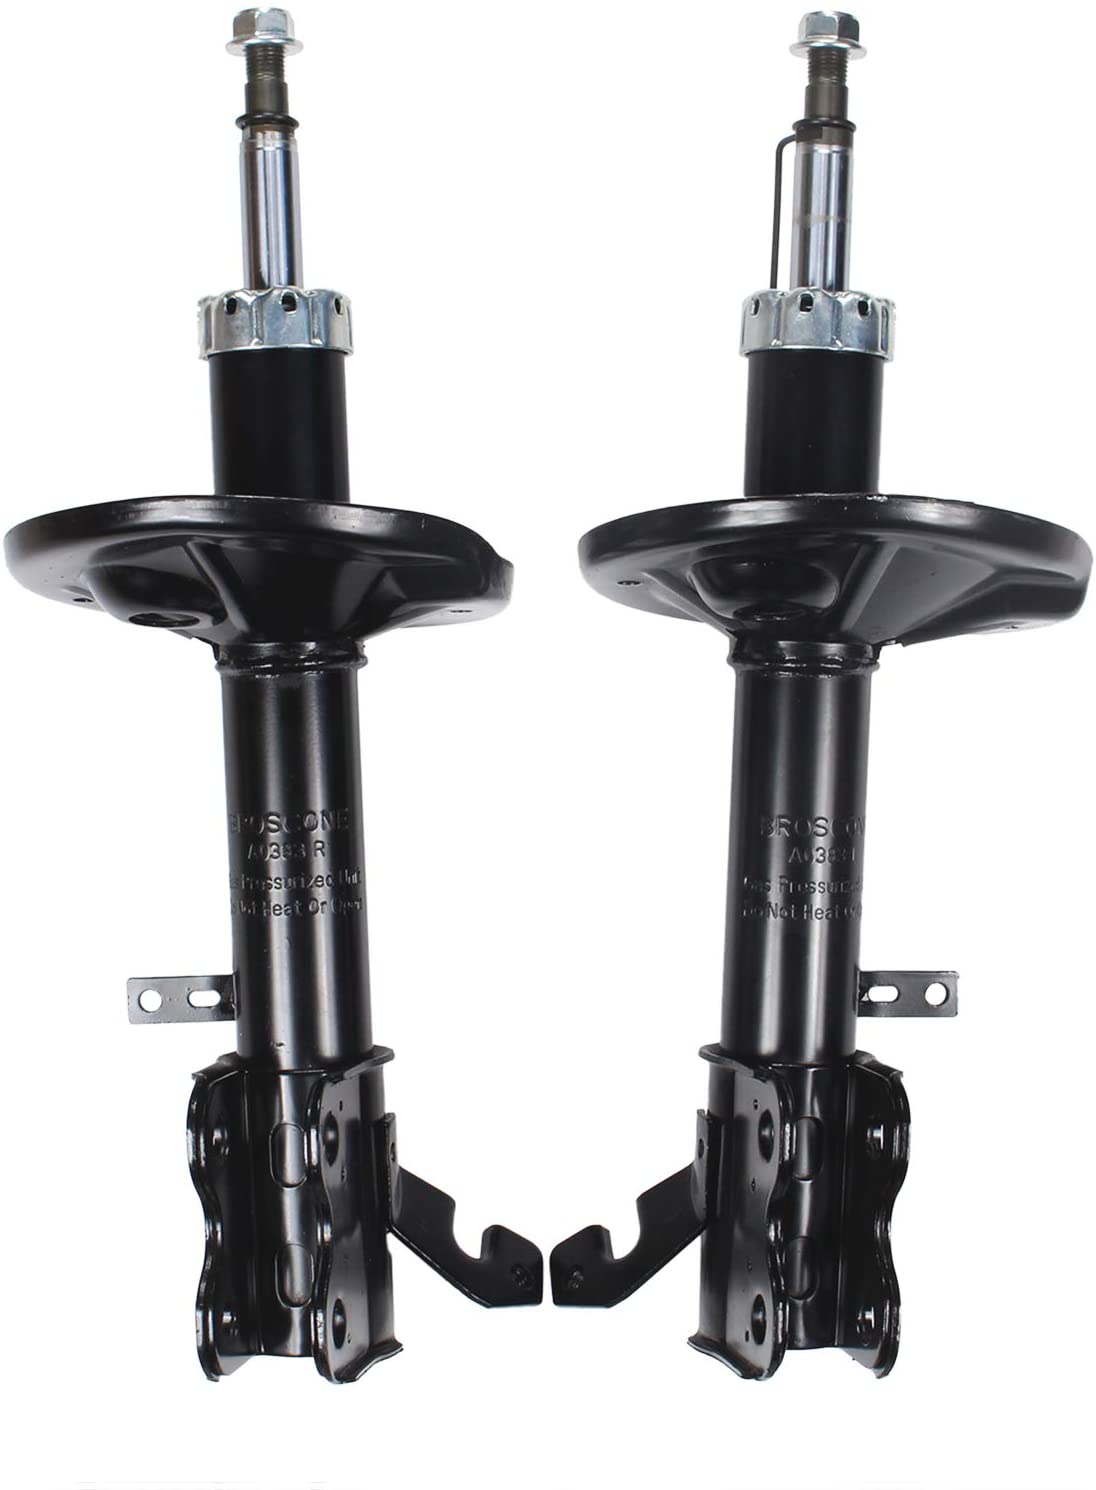 LYW 1 Pair Set Front Left + Right Side Shock Strut Compatible with 98-02 Chevrolet Prizm 93-97 Geo Prizm 93-02 Corolla